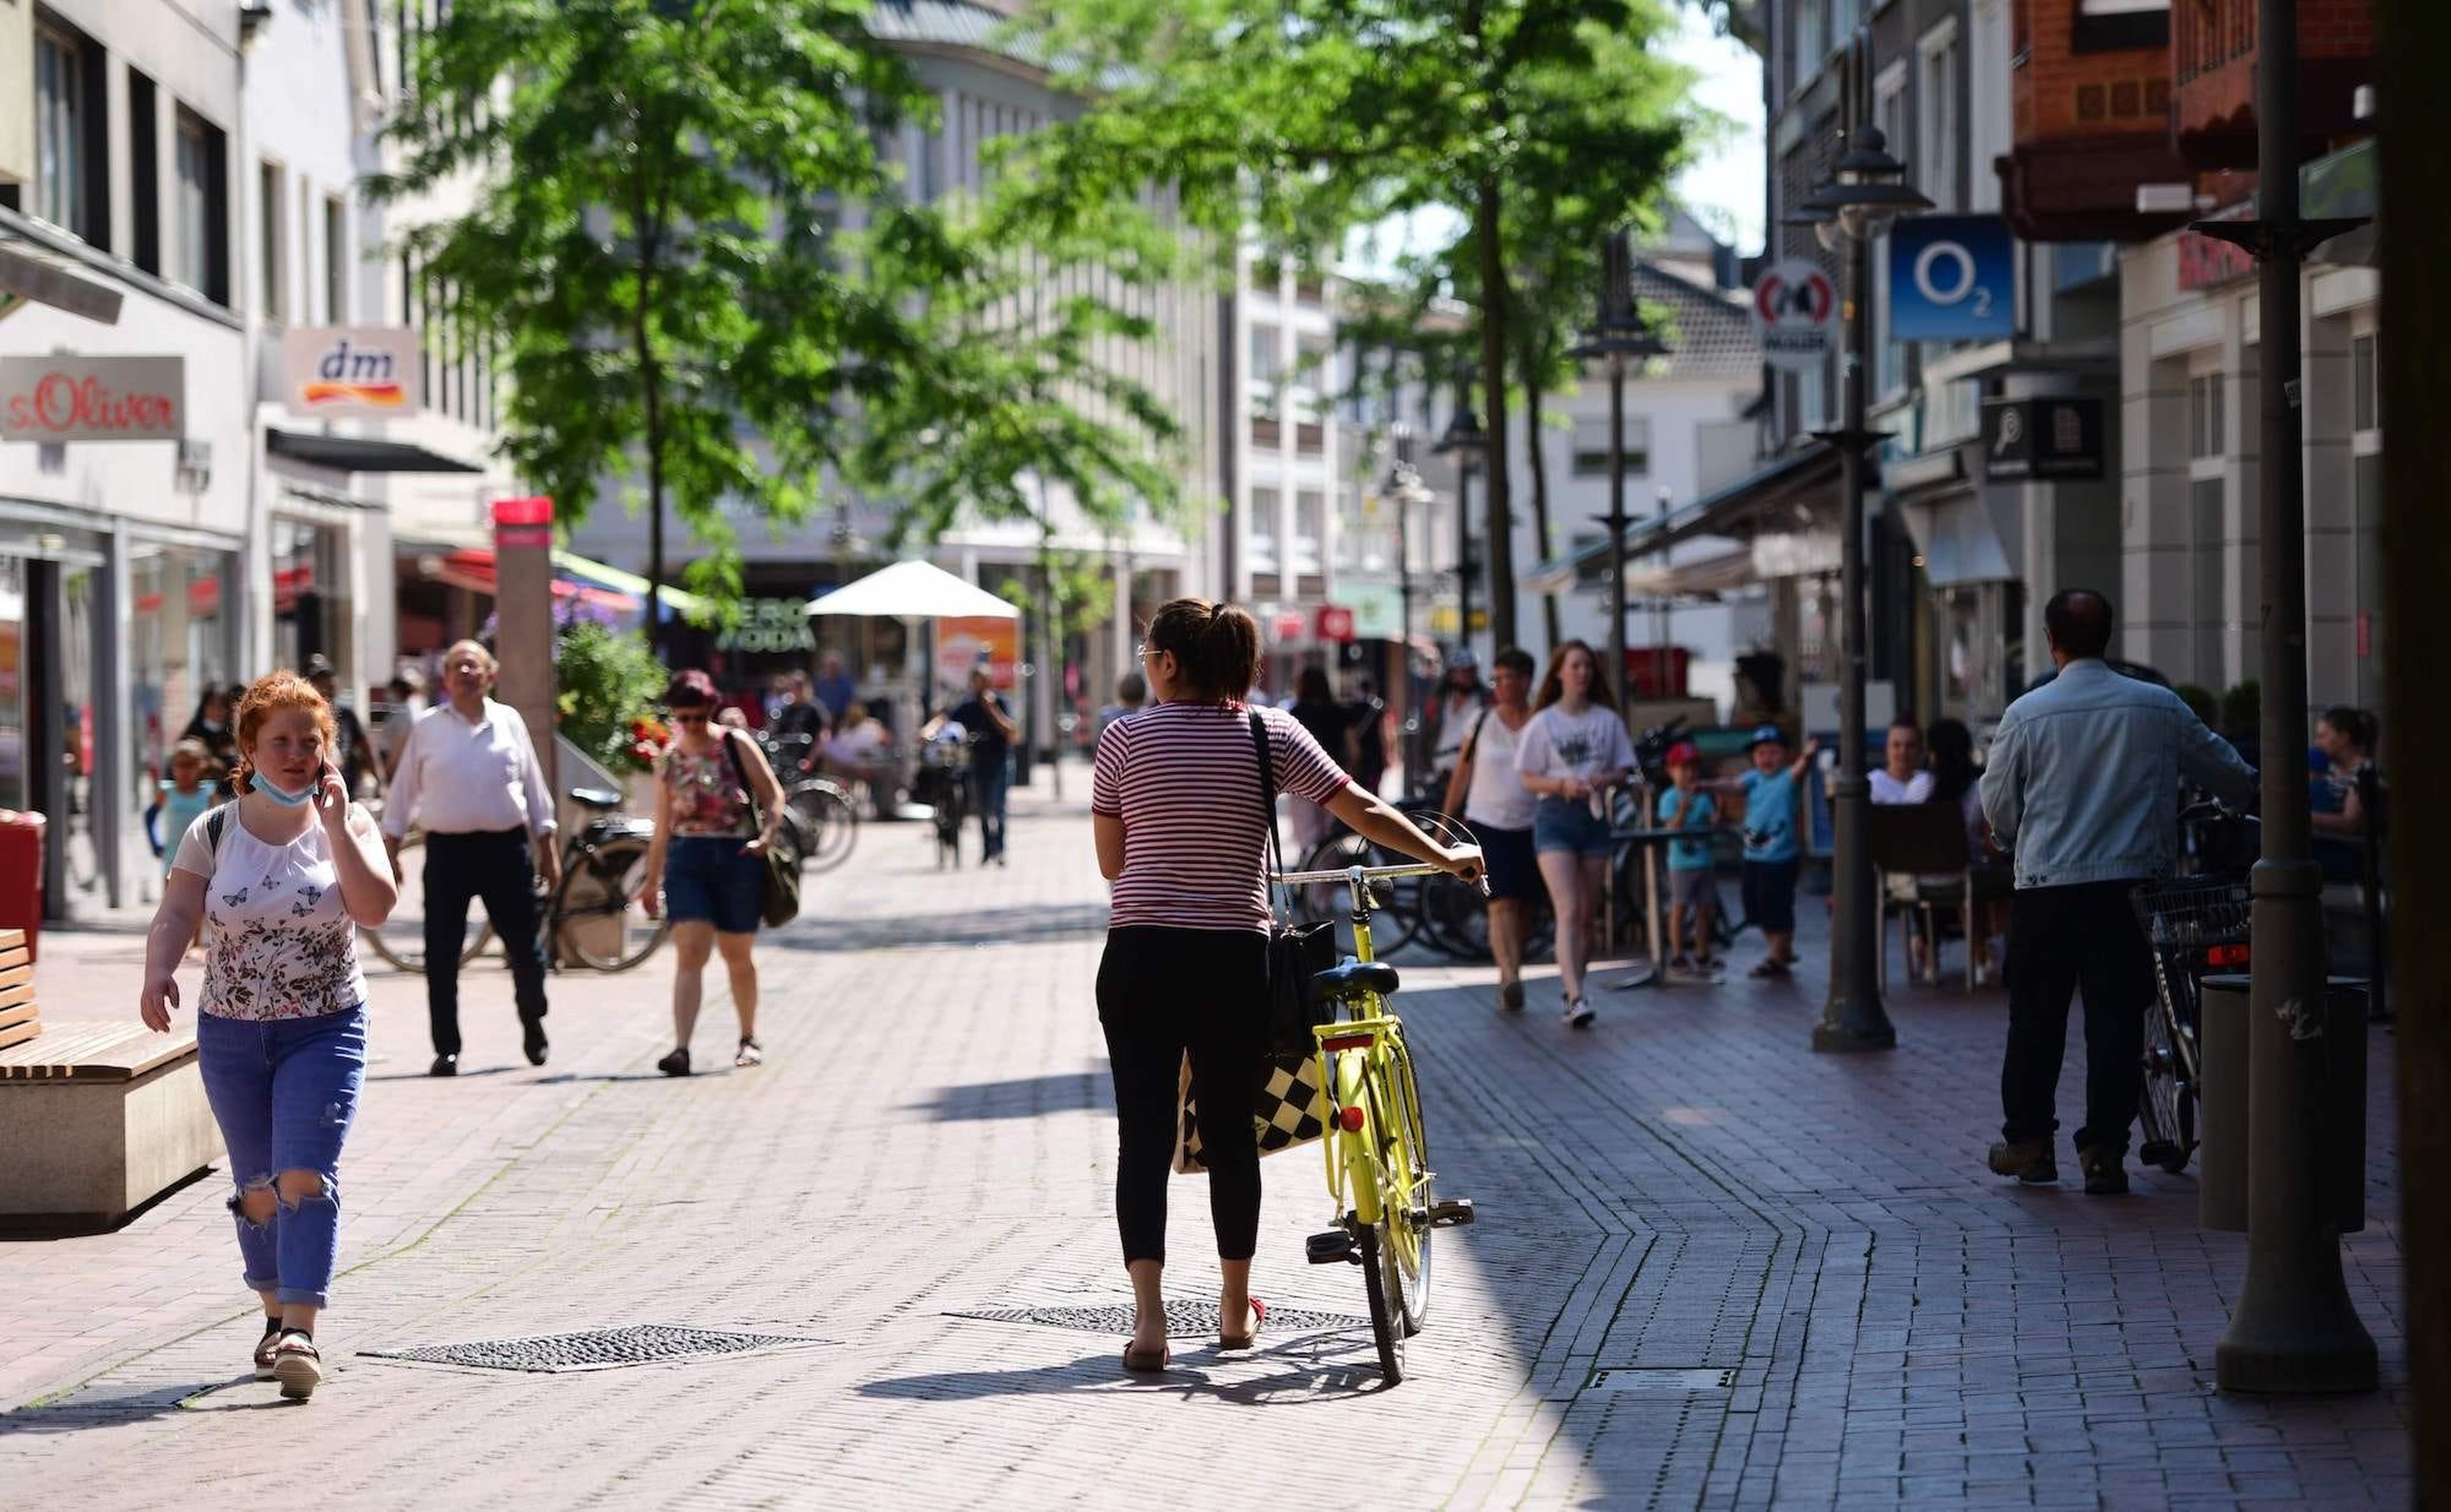 Citizens walk at the pedestrian zone in Guetersloh, western Germany on June 23, 2020.